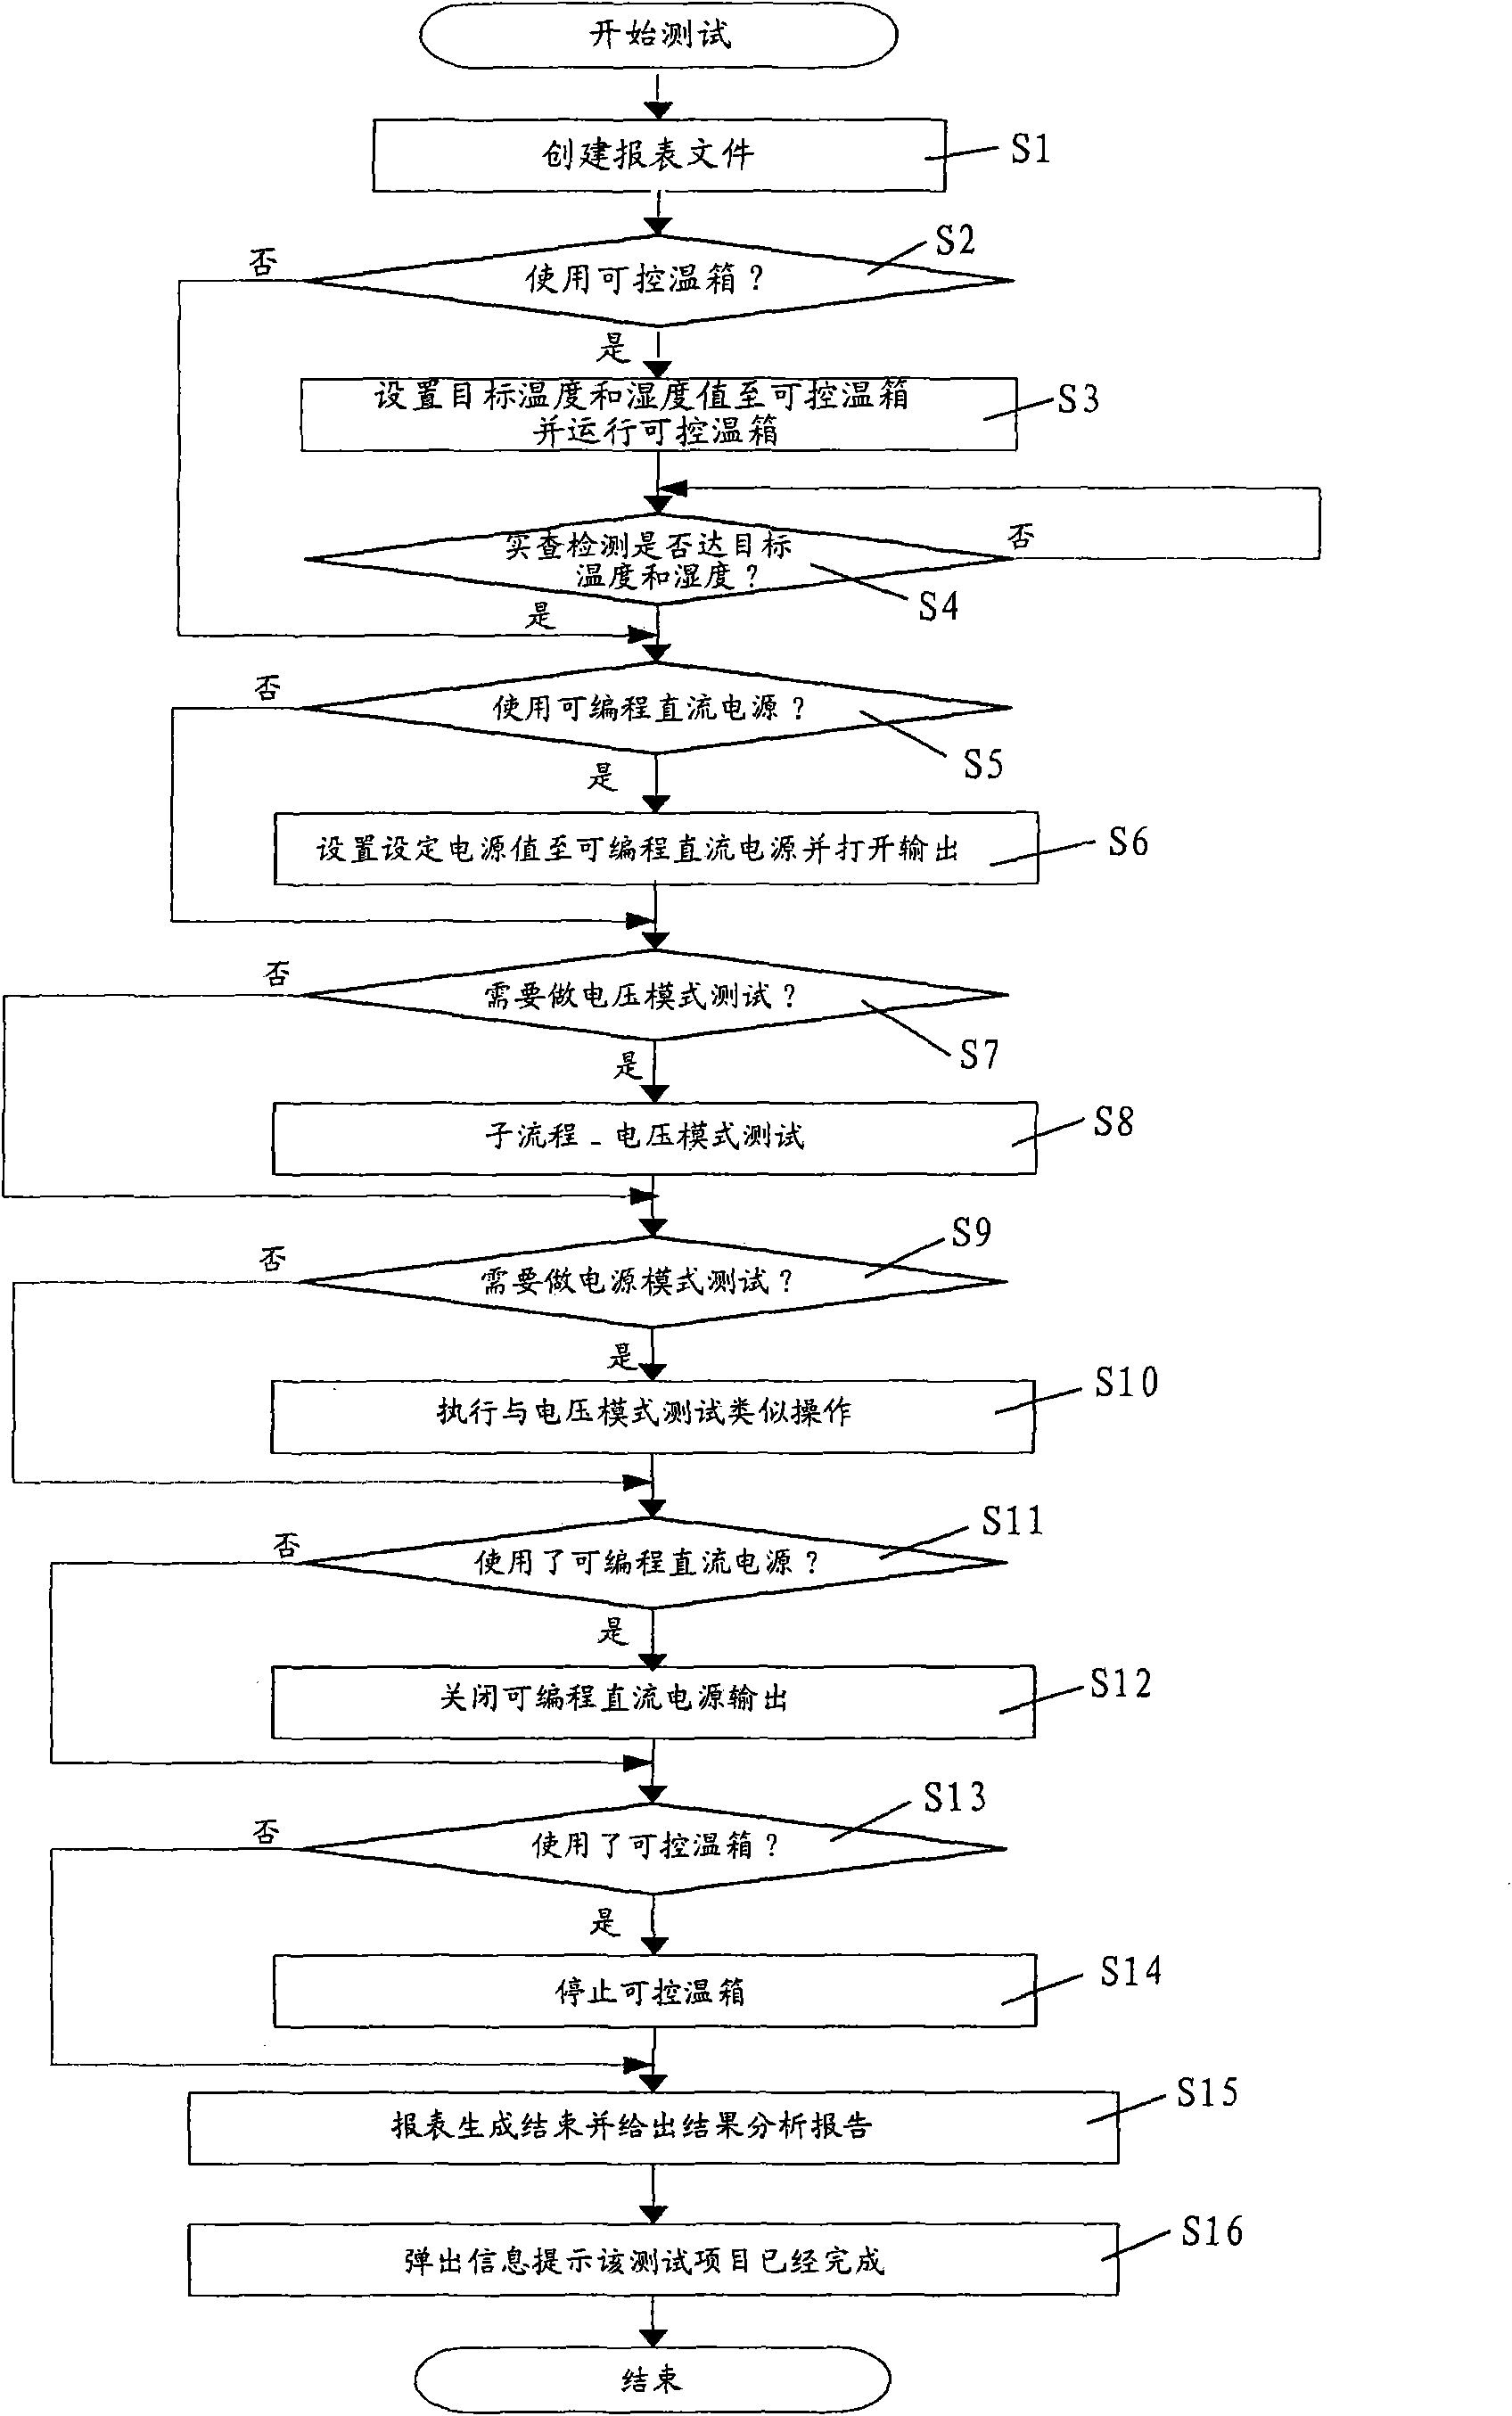 System and method for automatically testing analog module used for programmable logic controller (PLC)